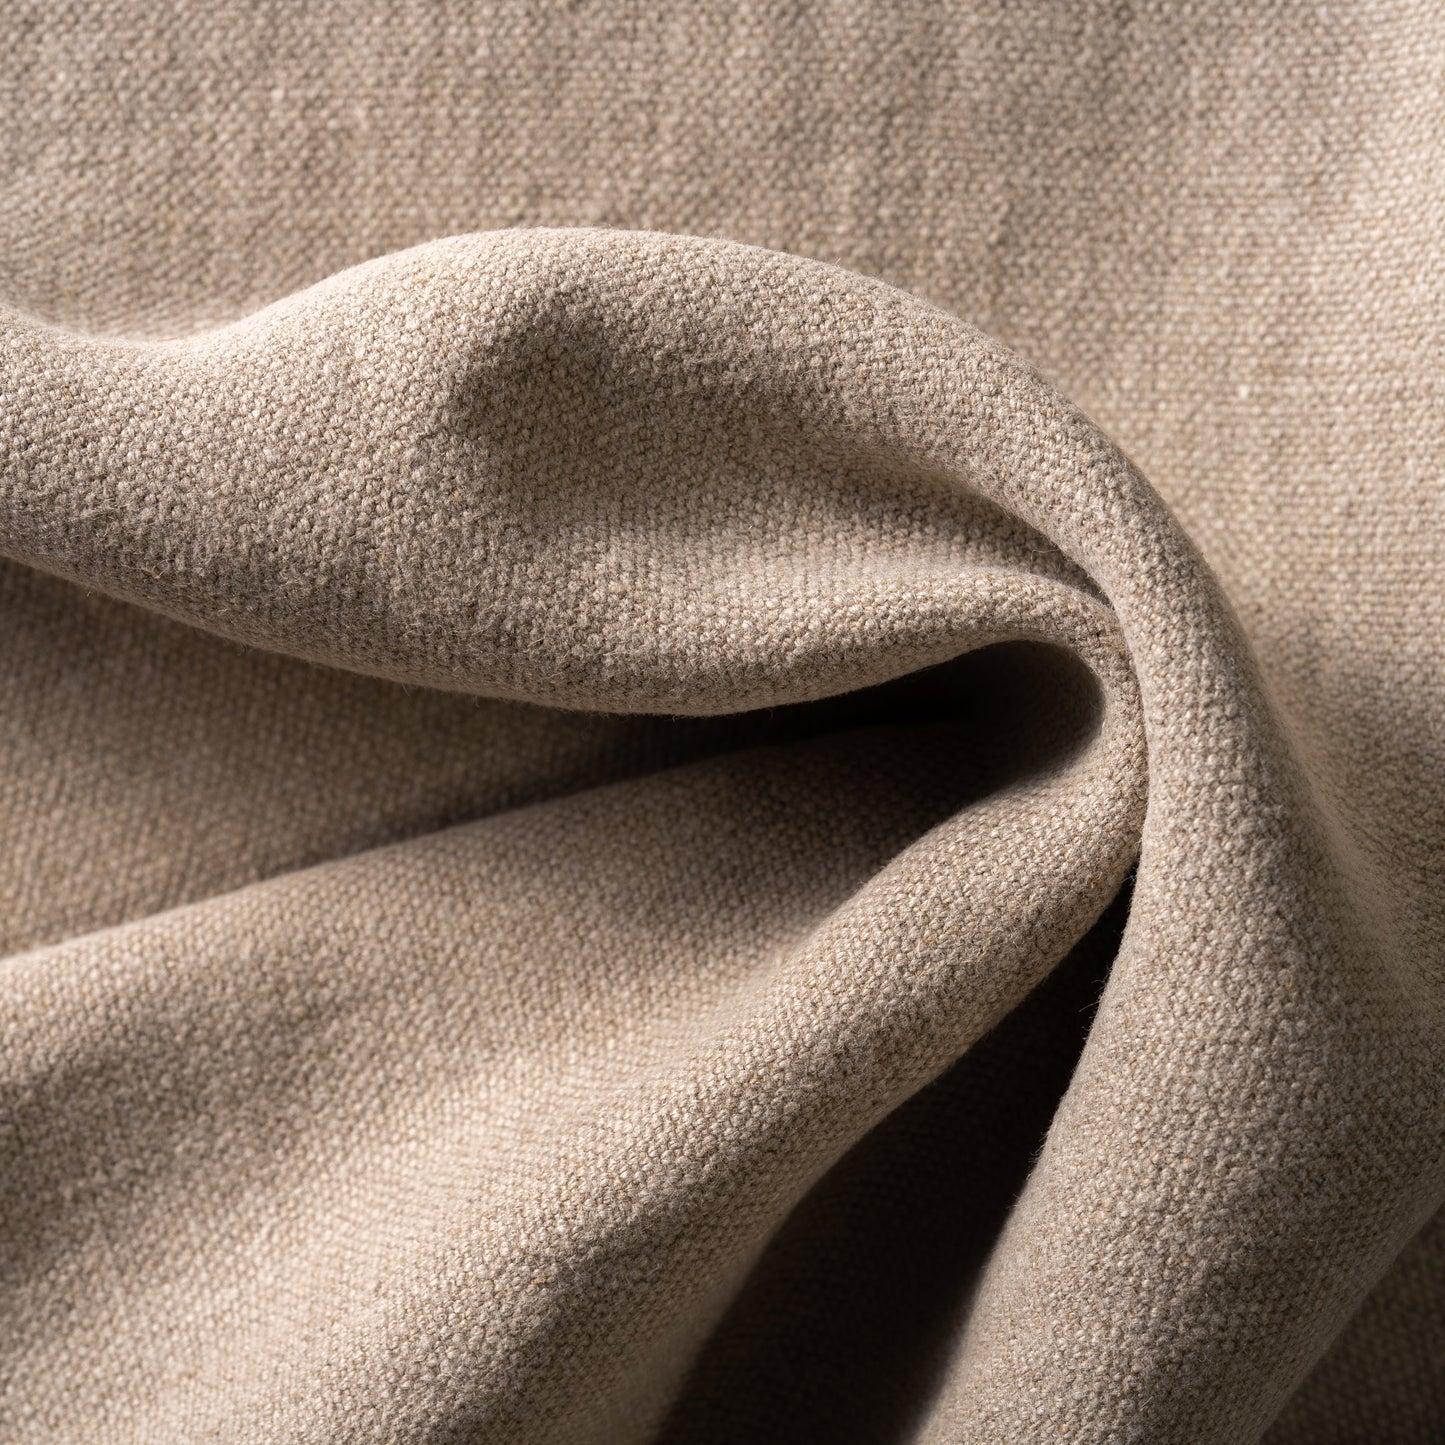 14.3 oz/sq yard 100% Upholstery/ Slipcover Weight Linen in Natural Swatch